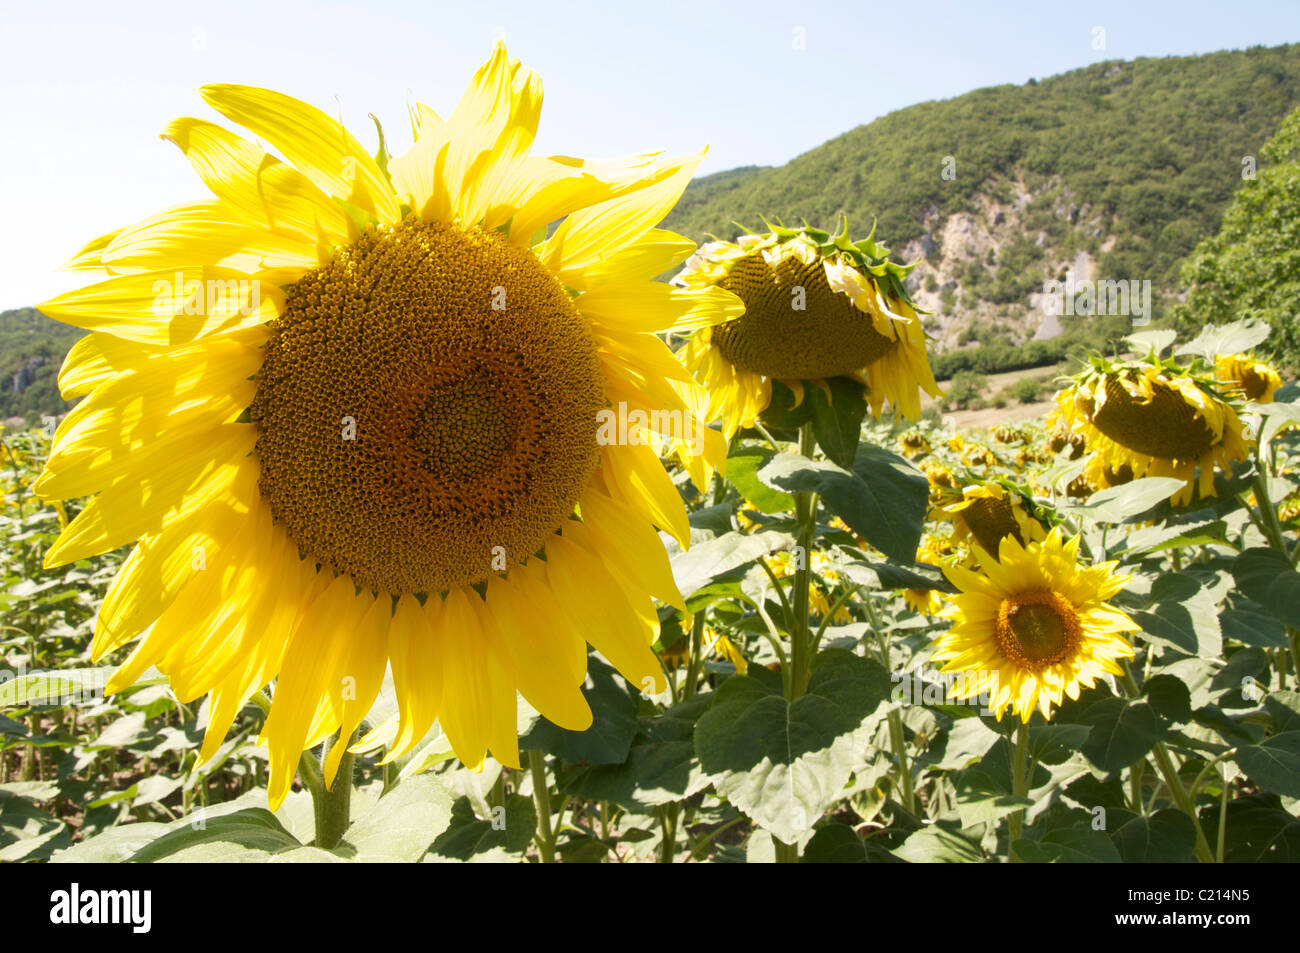 Summertime in the French countryside. A field of yellow Sunflowers (Helianthus Anuus) grow in the Vercors Regional Park. La Drôme, southeast France. Stock Photo